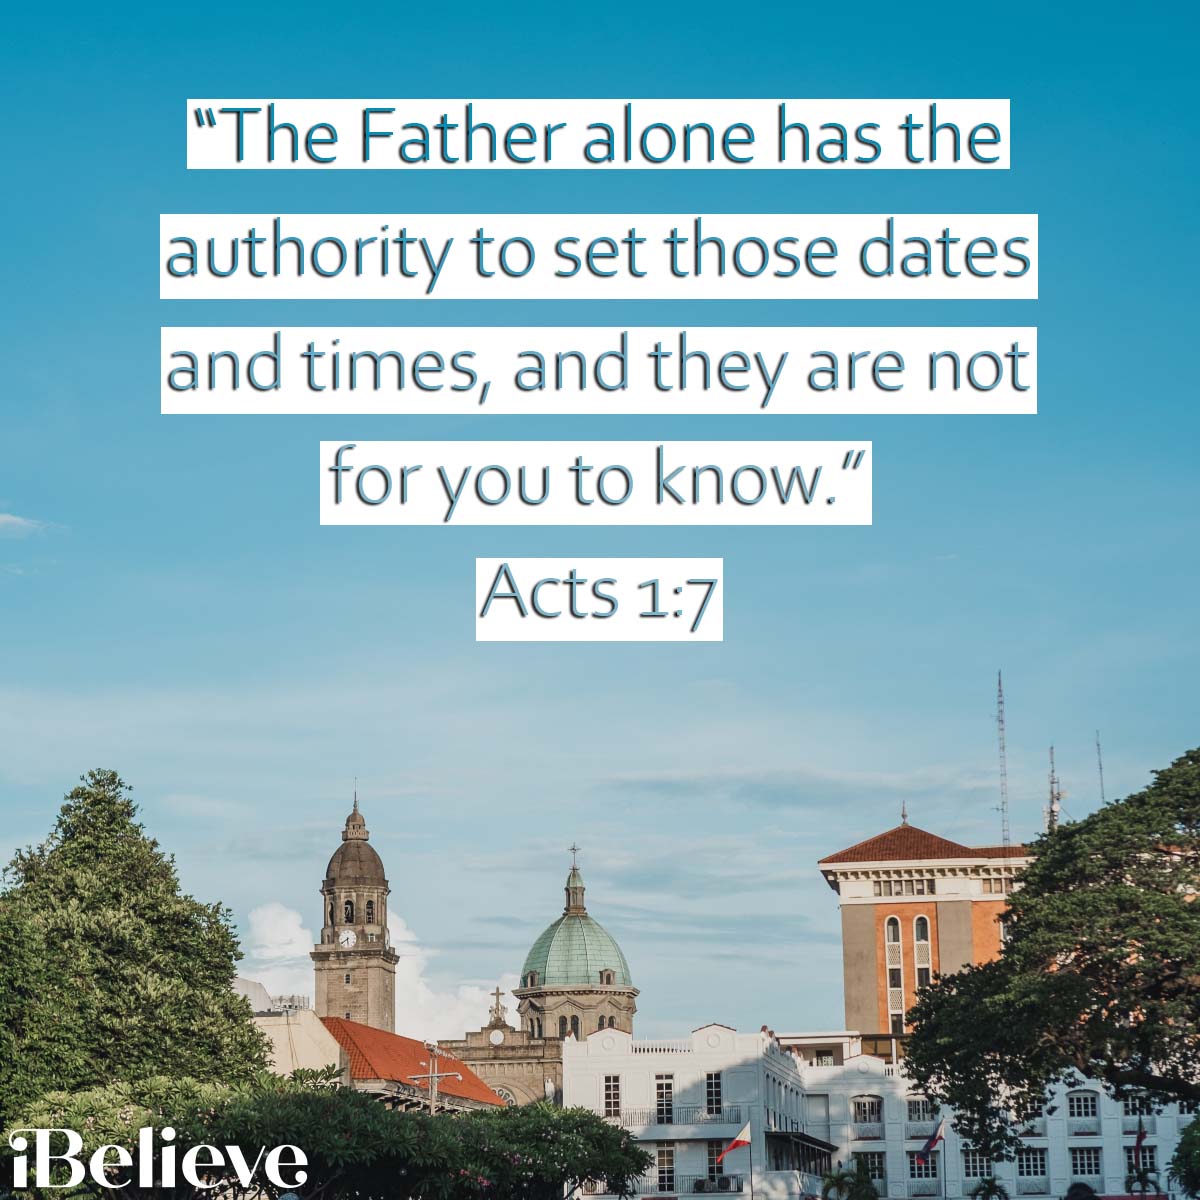 Acts 1:7, inspirational image